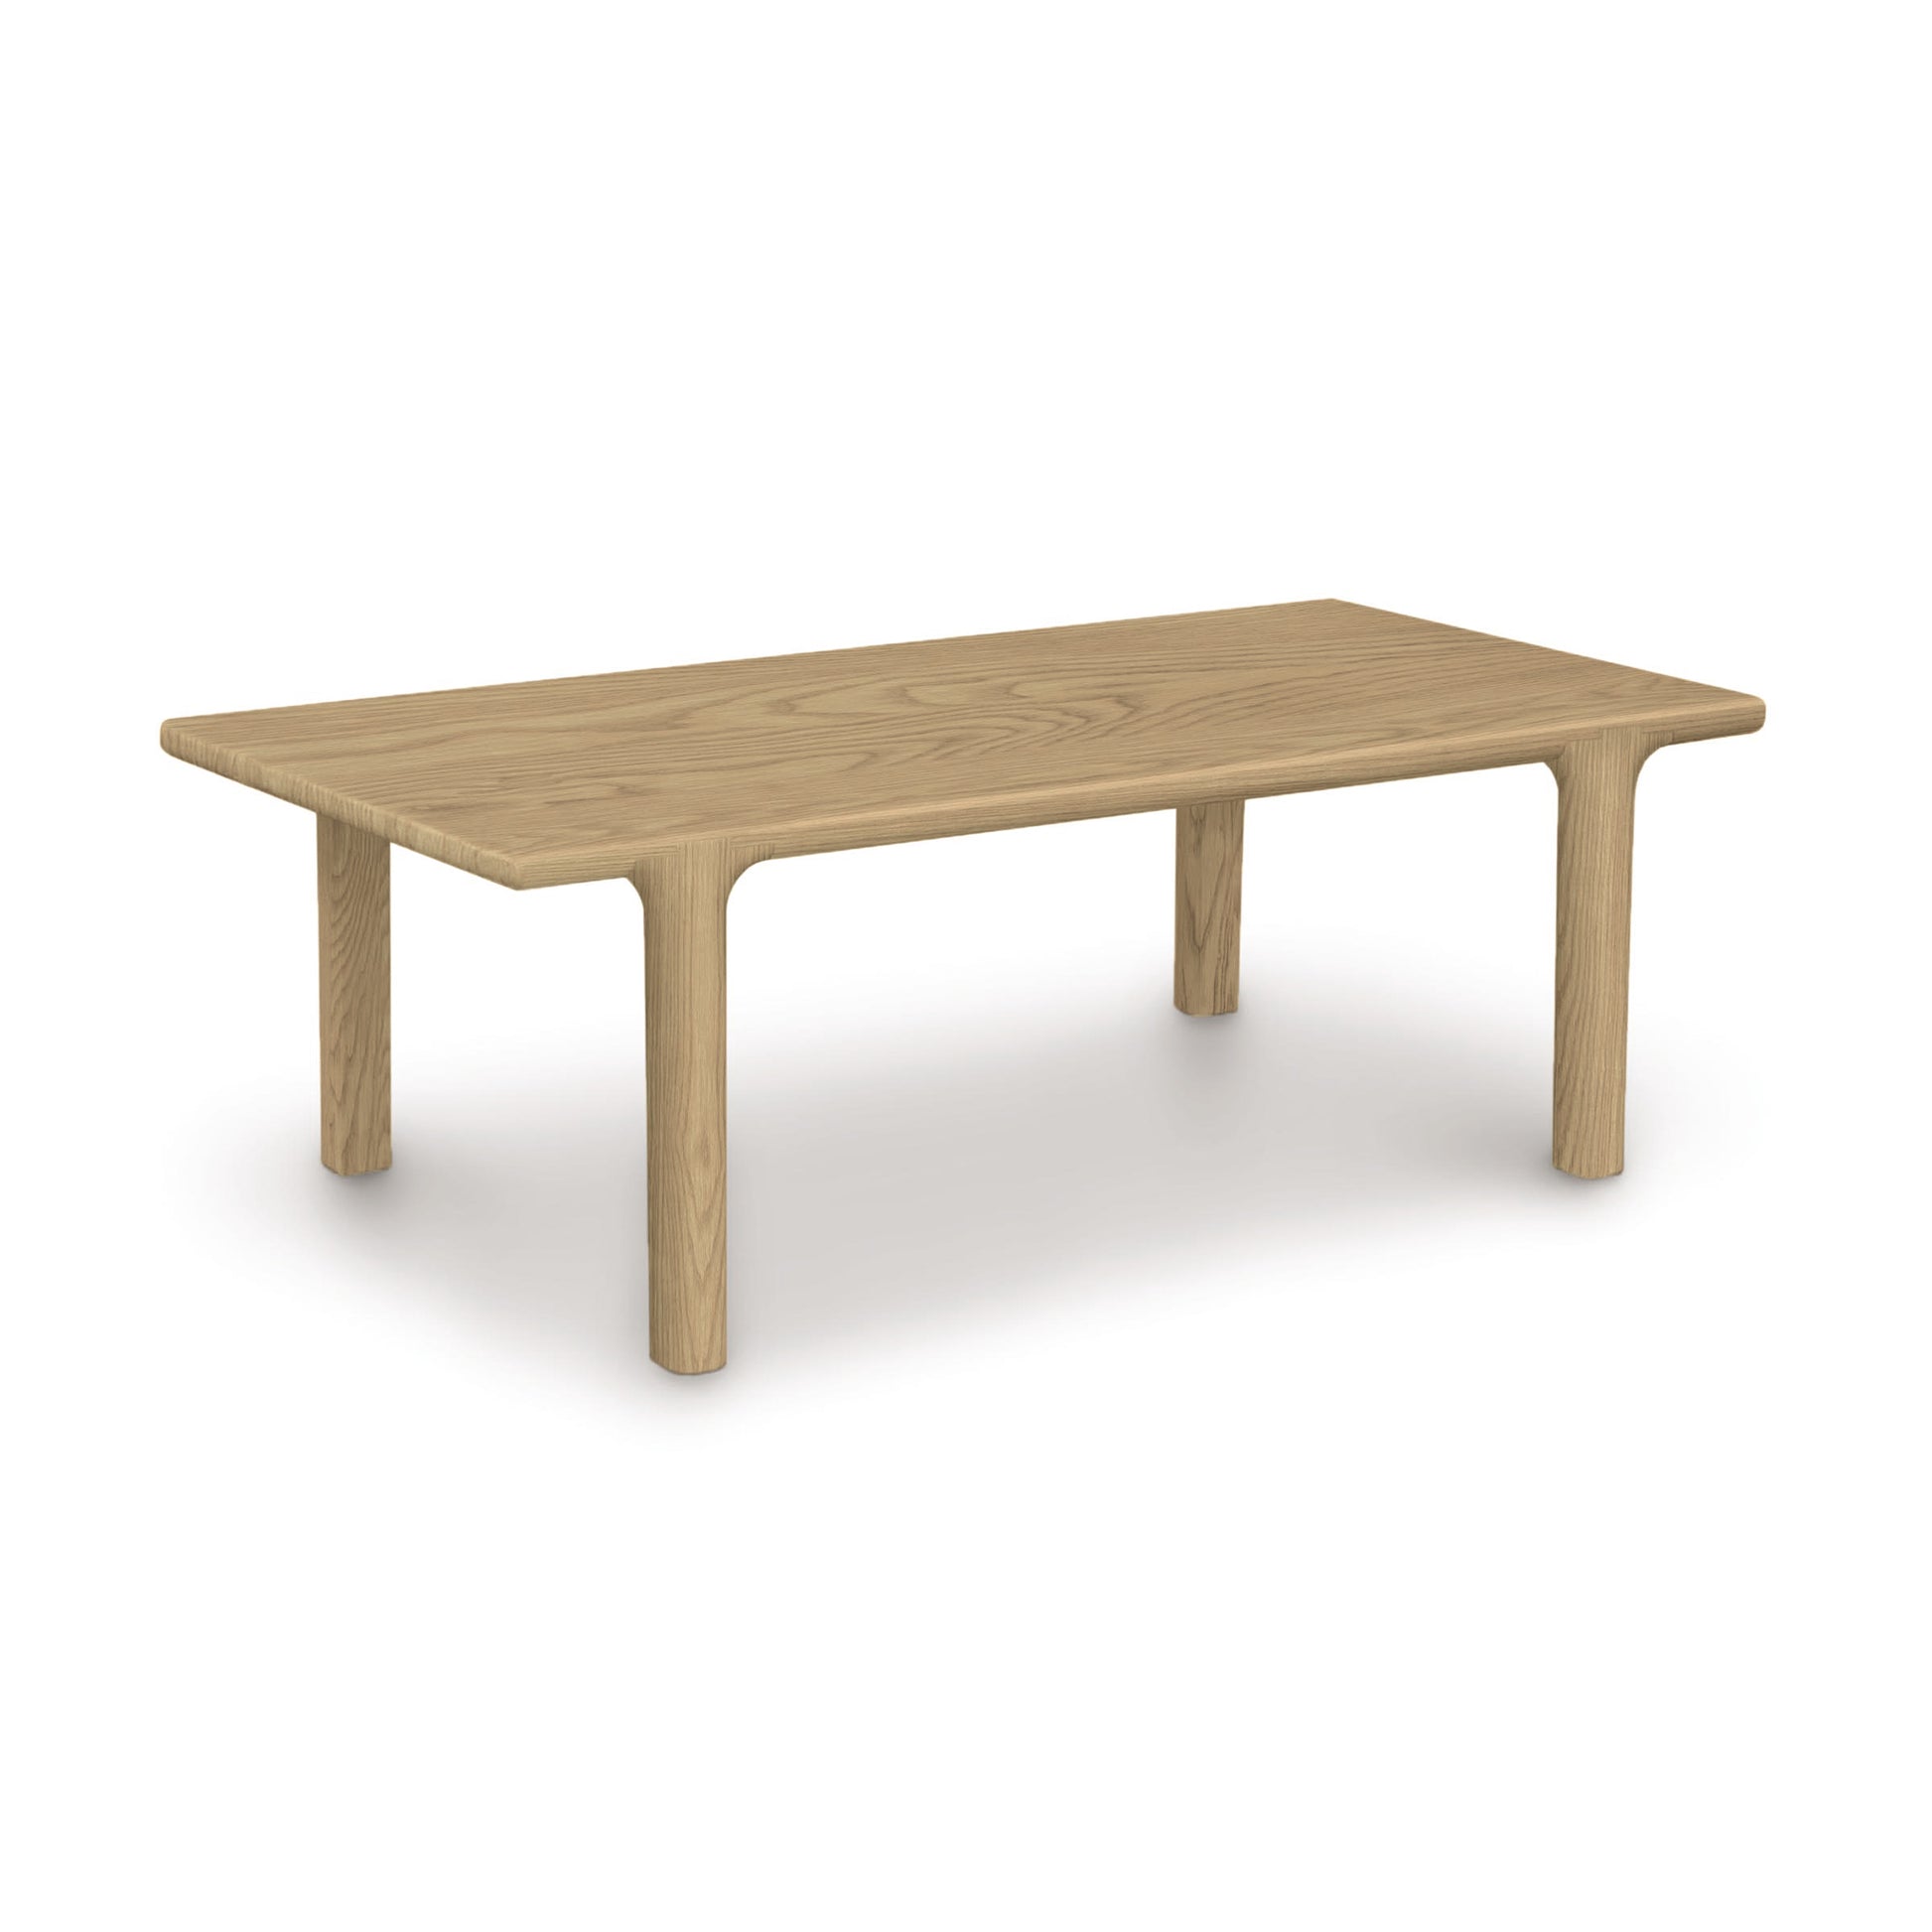 A solid North American hardwood Copeland Furniture Sierra Rectangular Coffee Table with four legs on a white background.